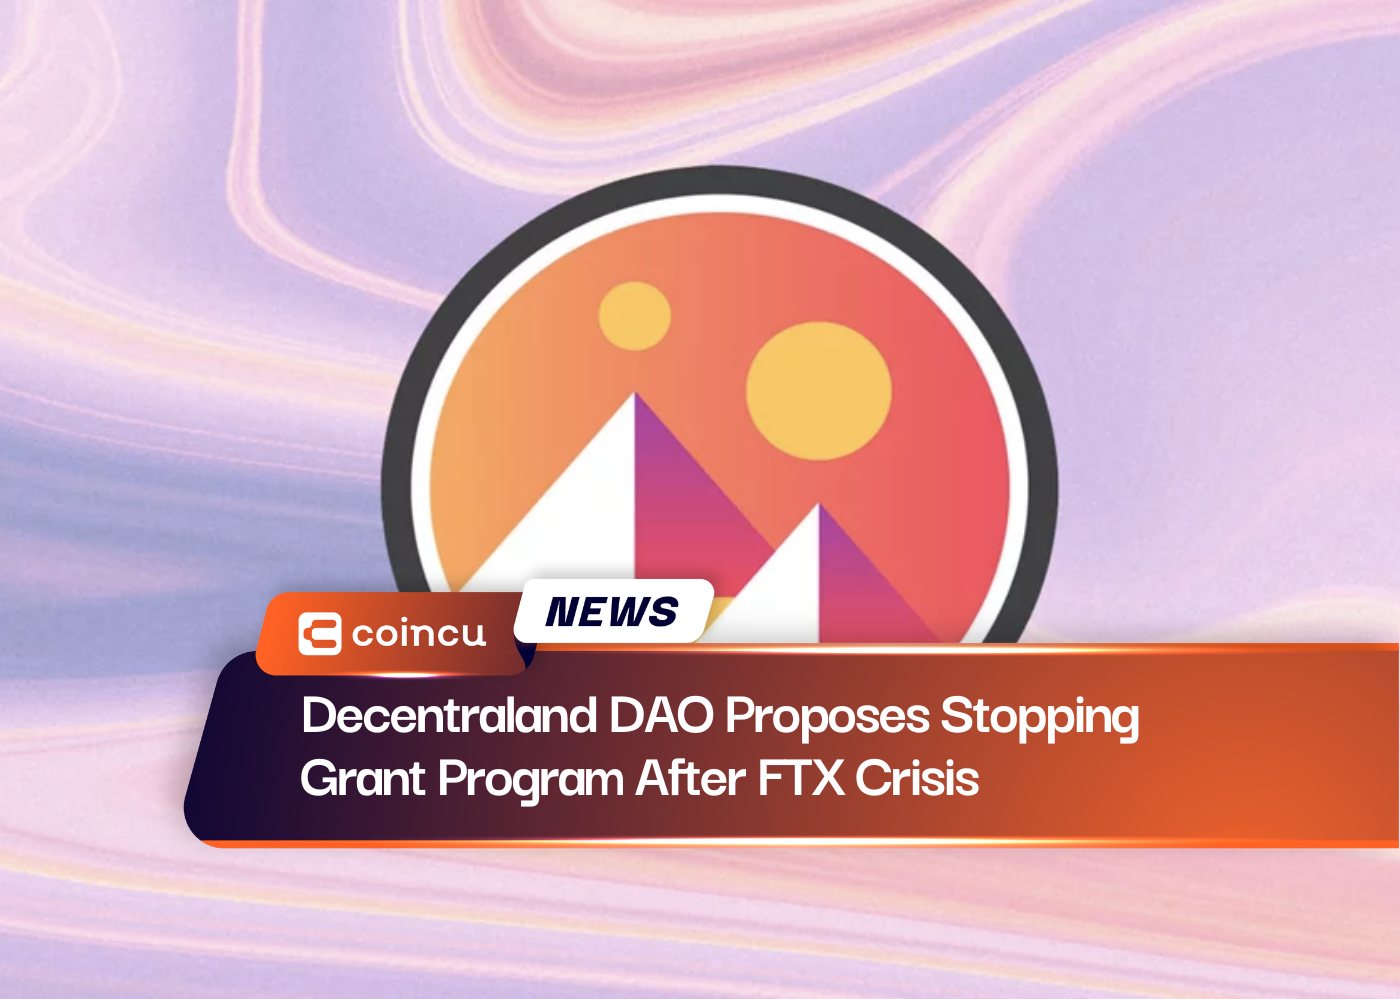 Decentraland DAO Proposes Stopping Grant Program After FTX Crisis